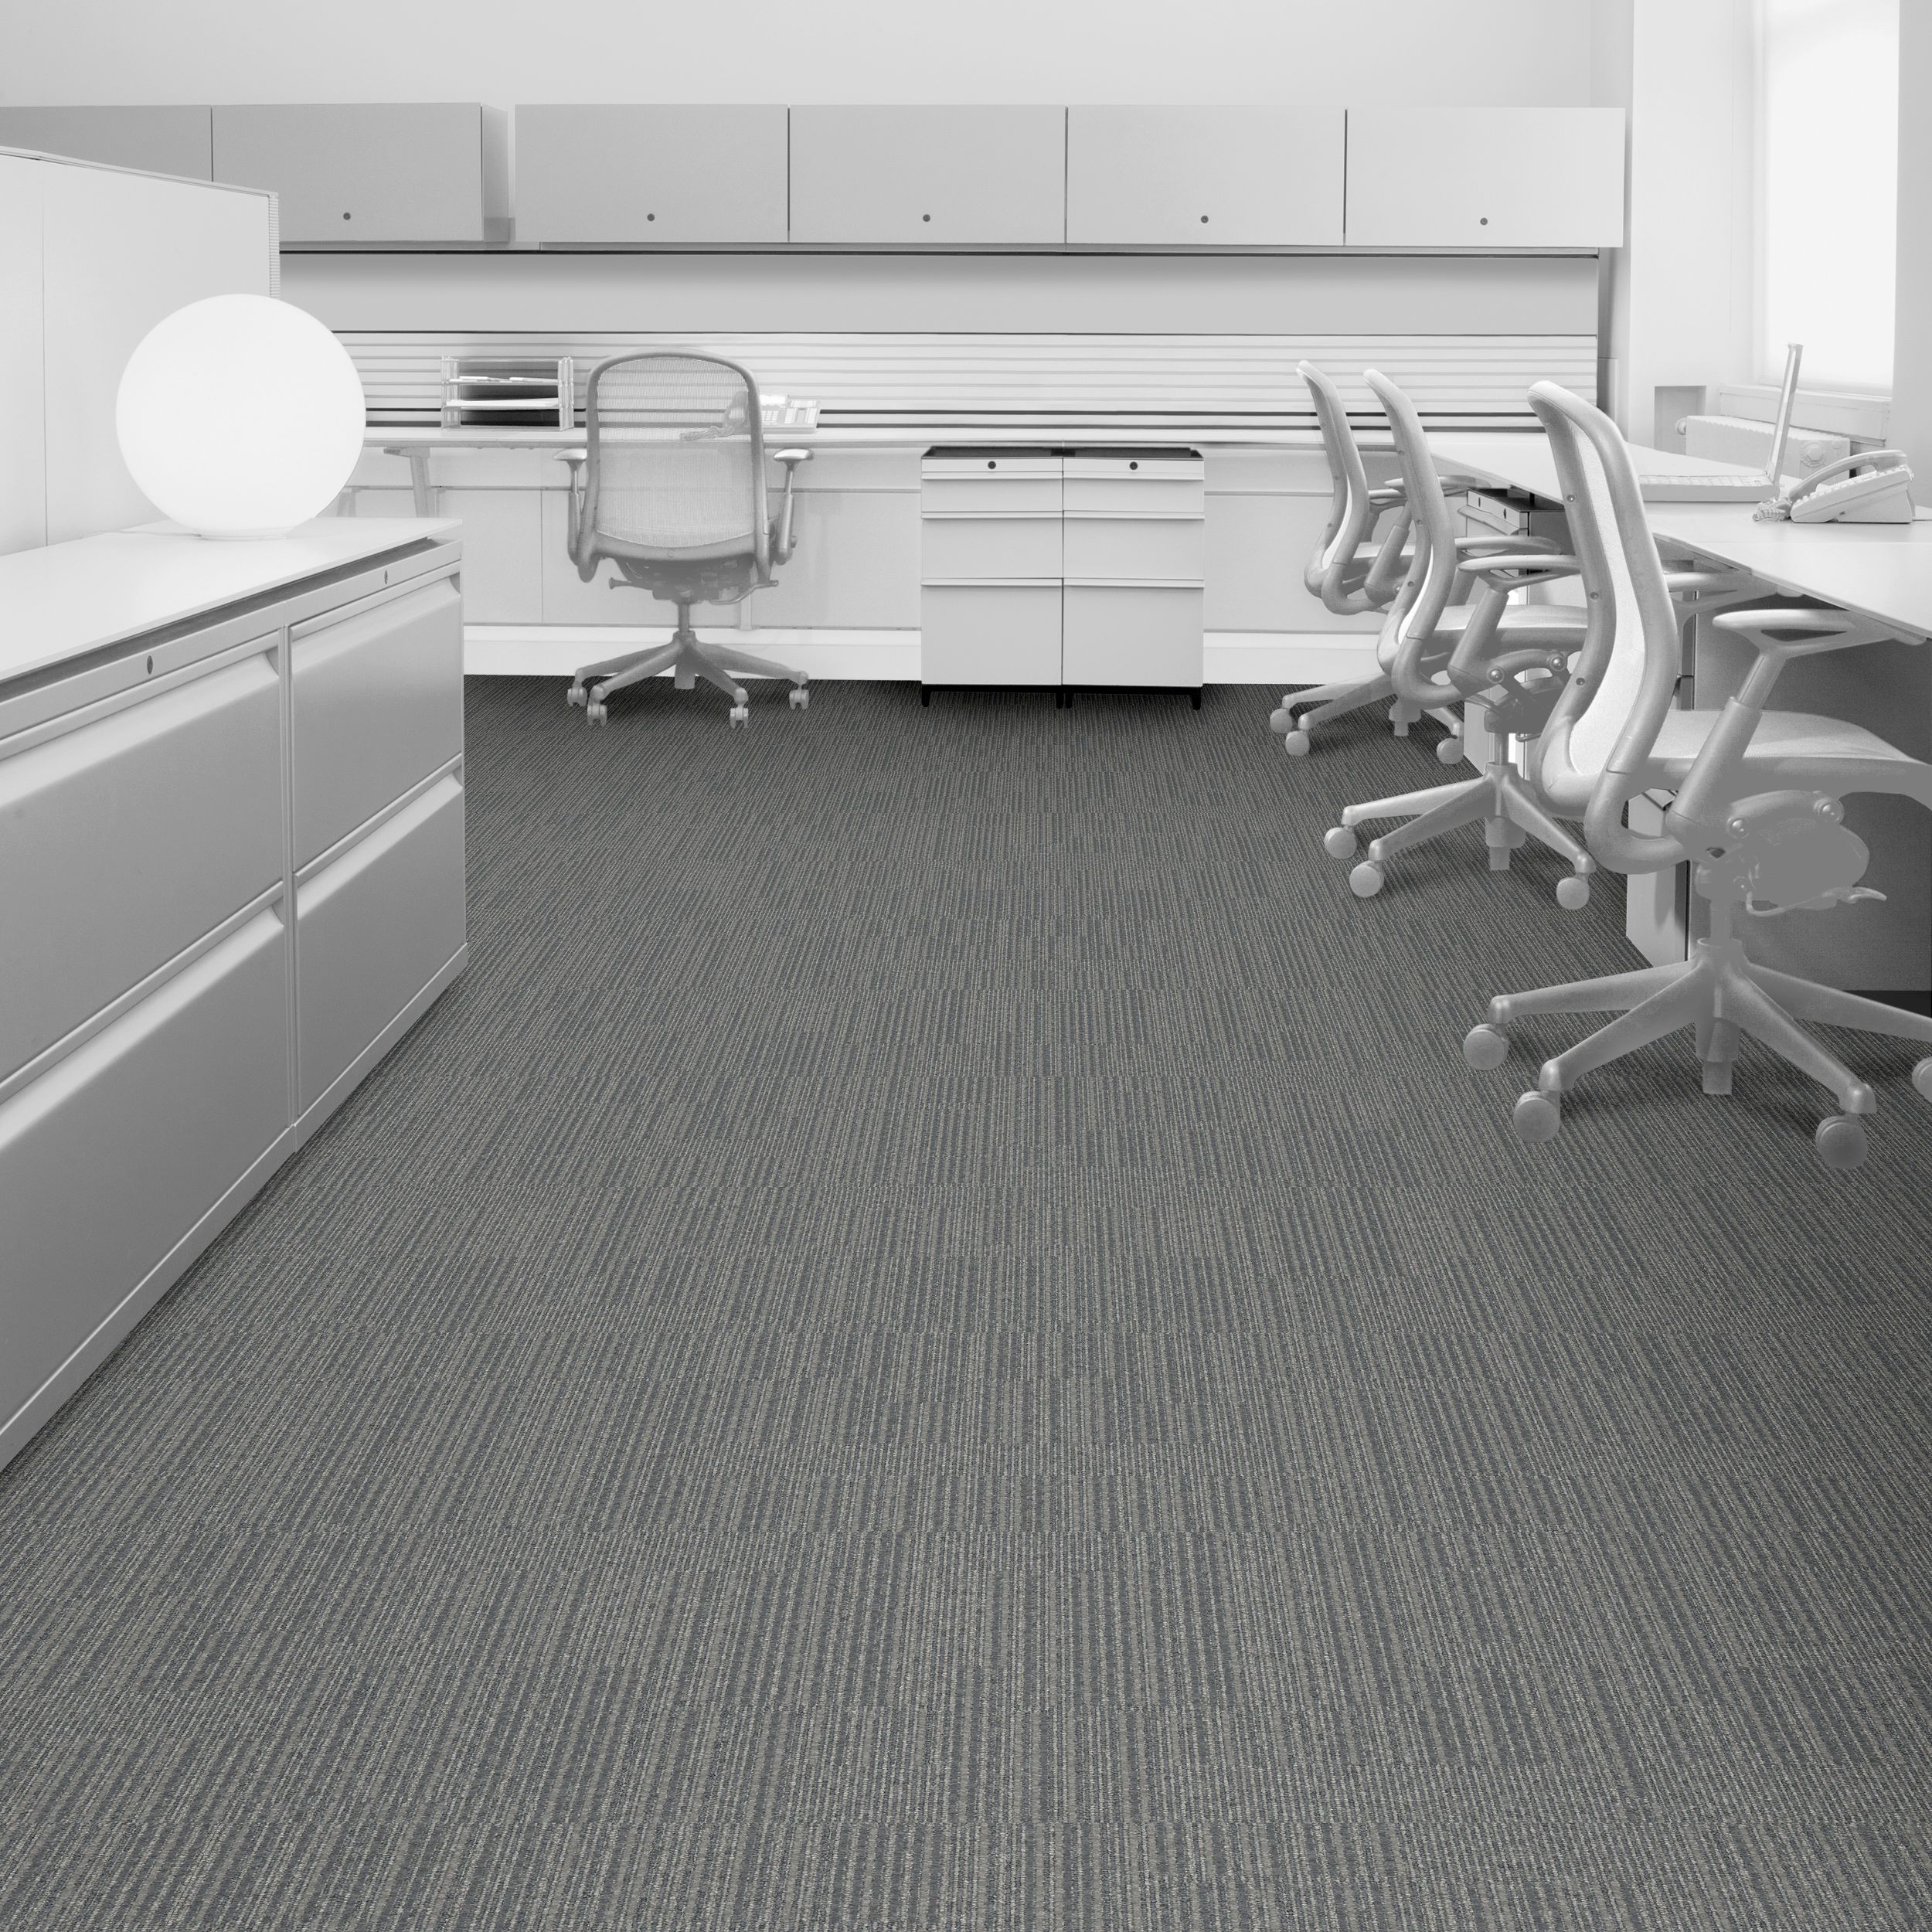 Interface Equilibrium Harmony Carpet Tile in office setting.